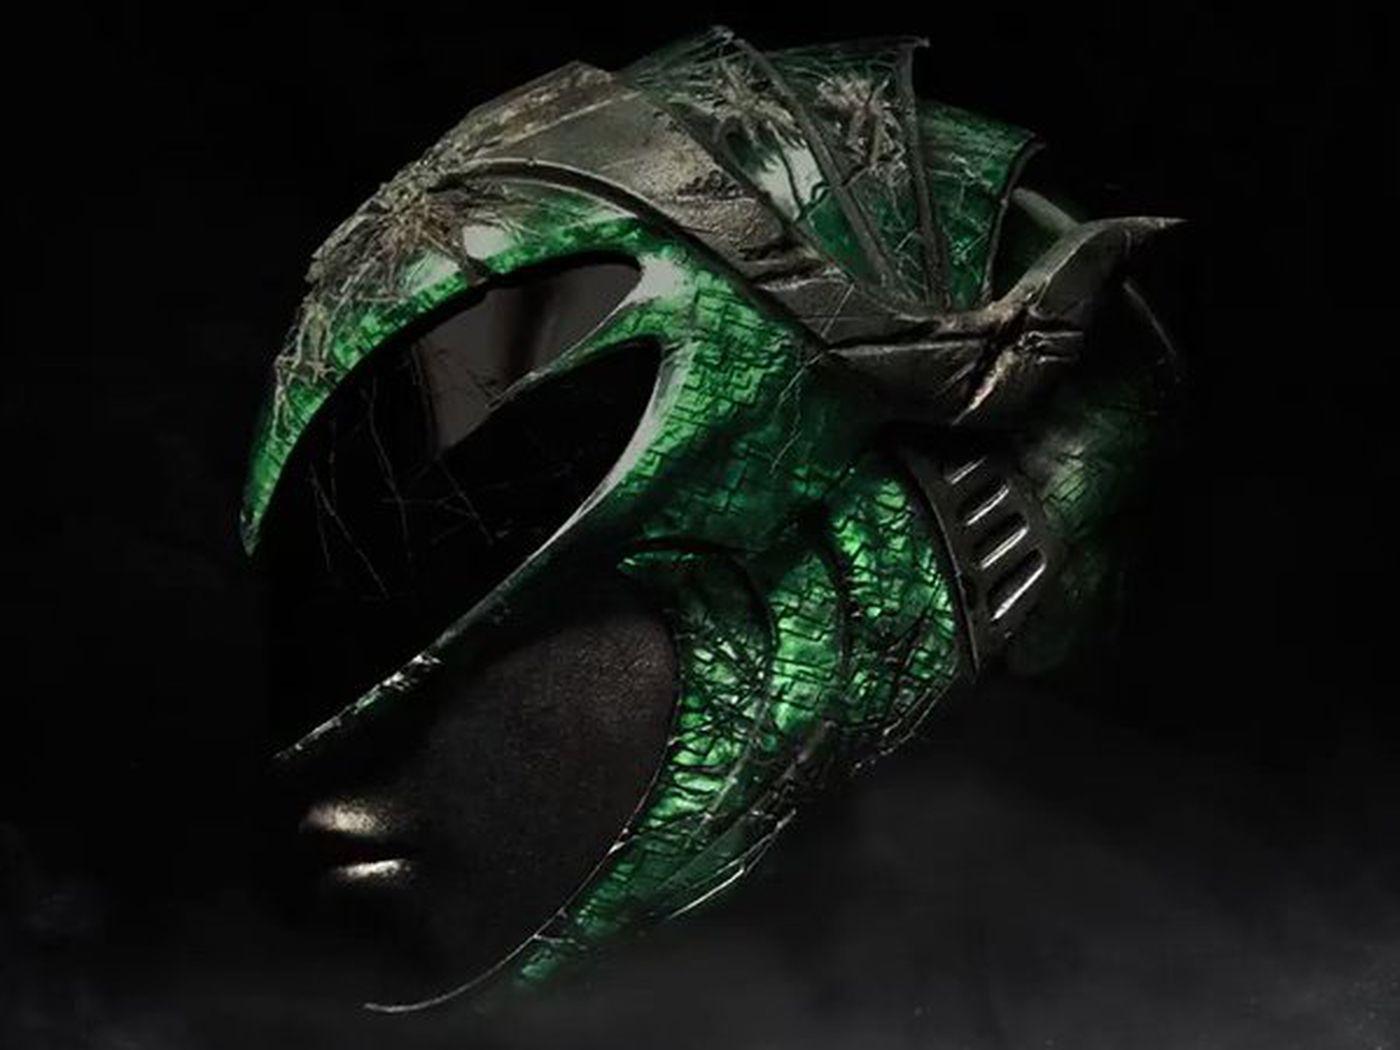 The Green Ranger is coming to the Power Ranger sequels